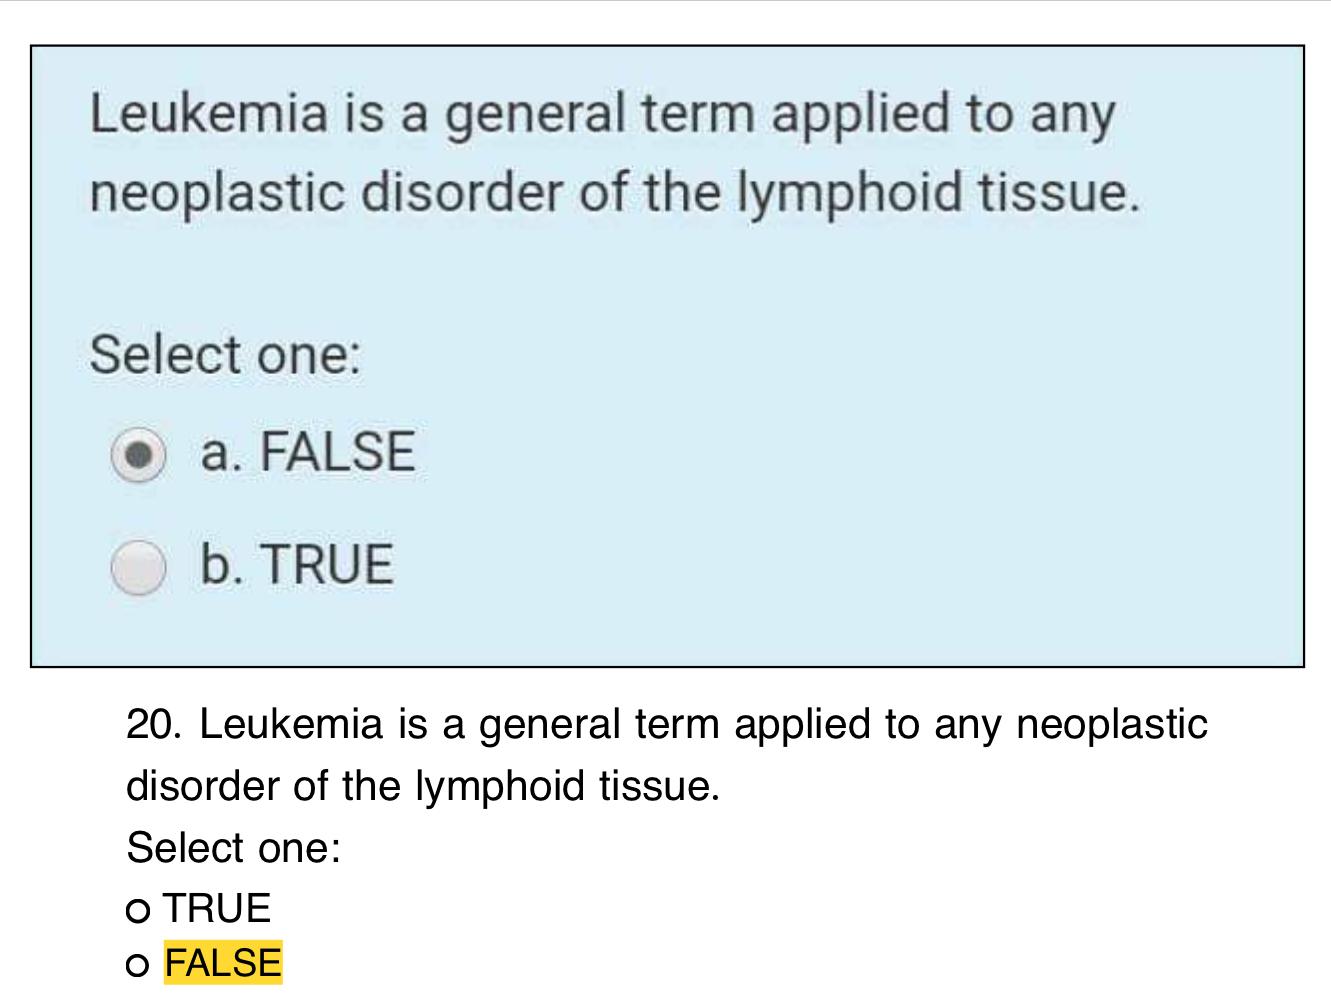 Leukemia is a general term applied to any neoplastic disorder of the lymphoid tissue.
Select one:
a. FALSE
b. TRUE
20. Leukem